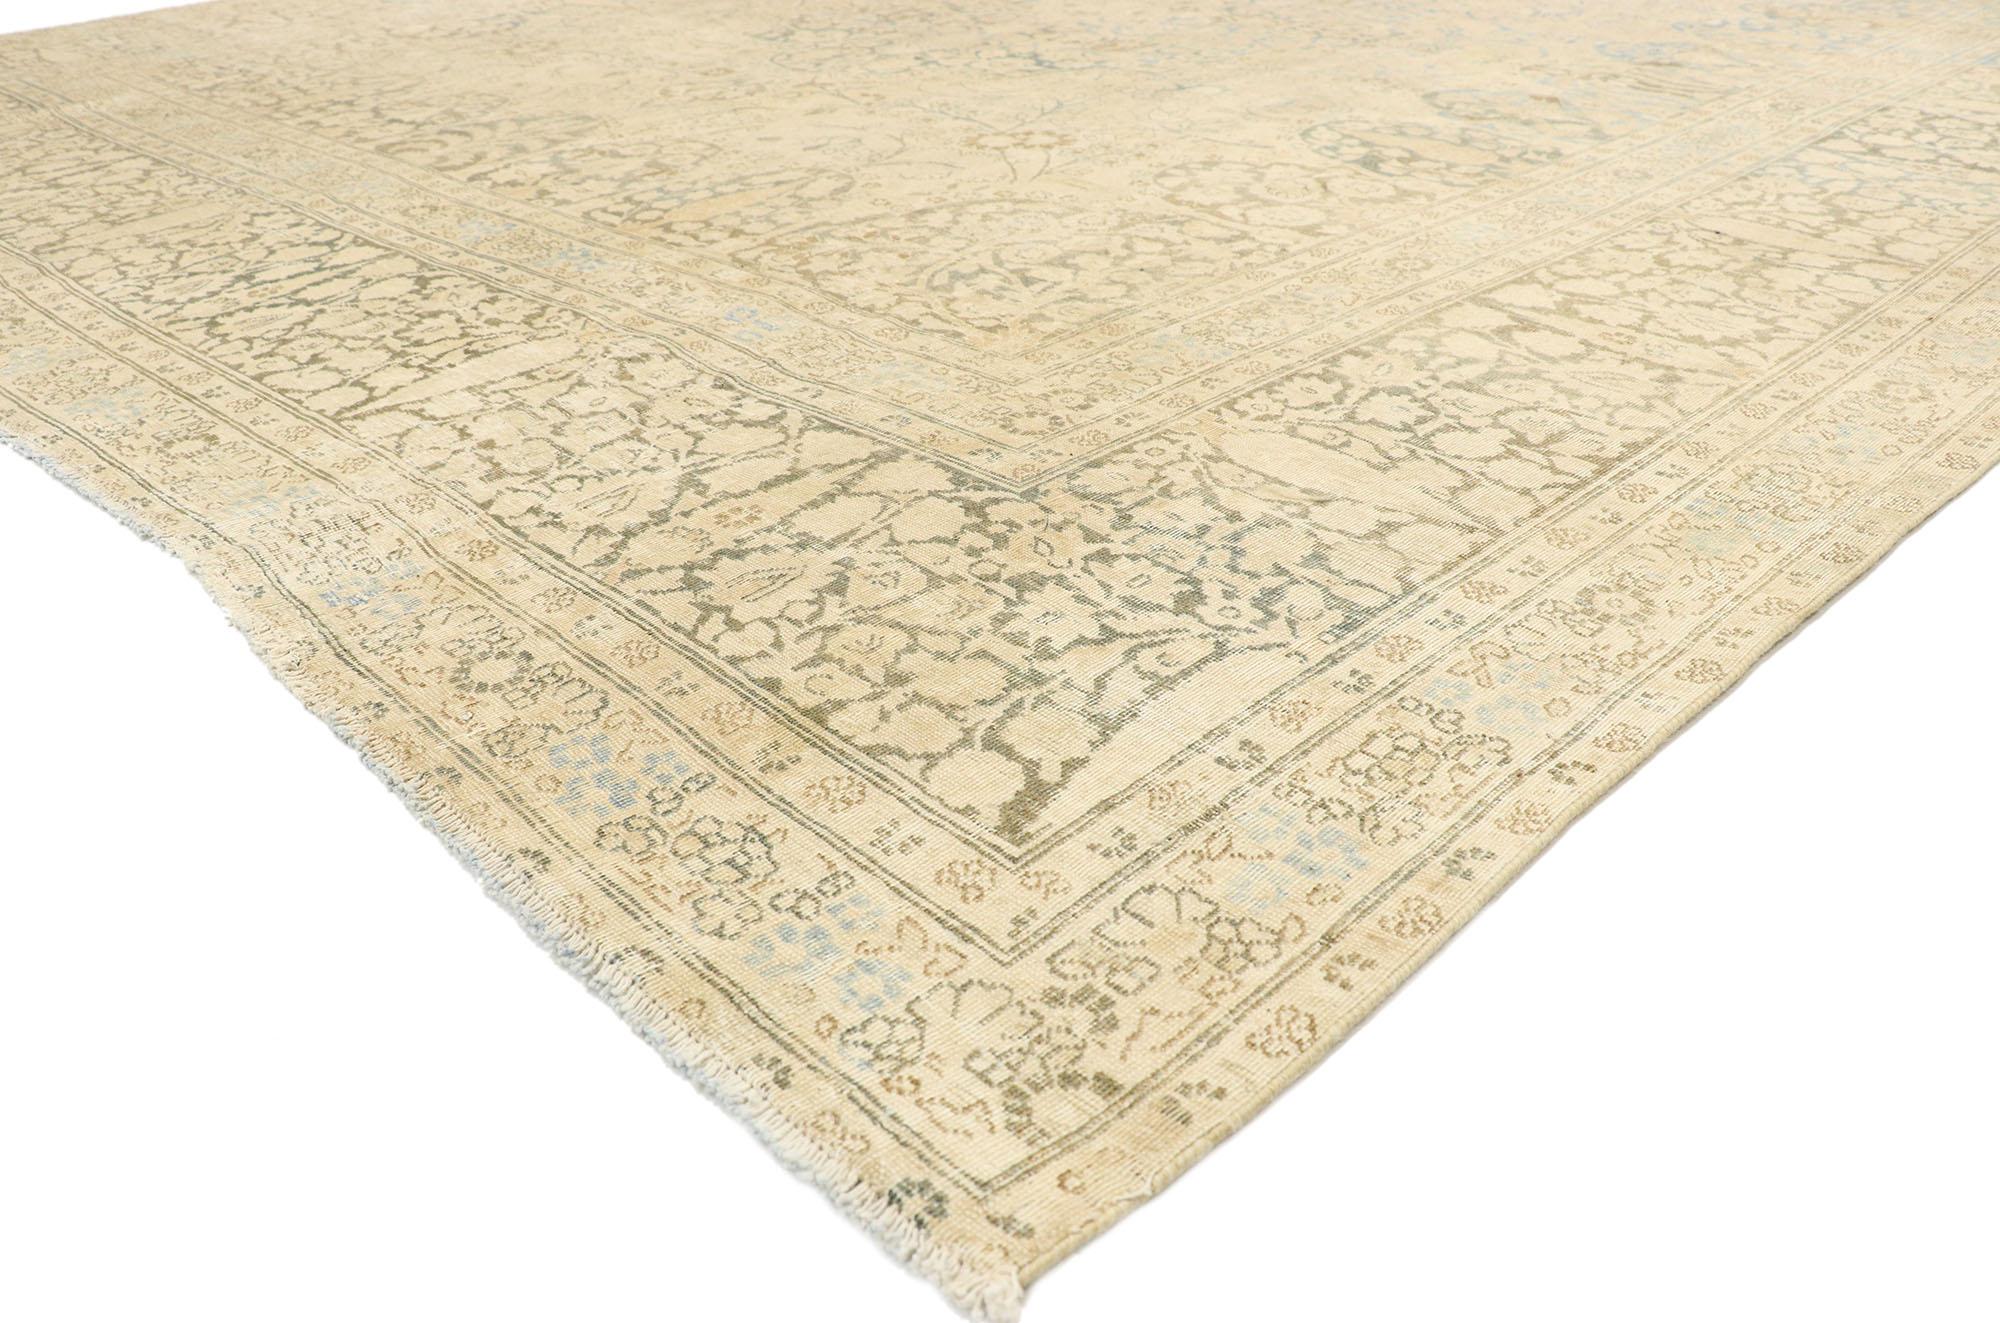 76607 Distressed Antique Persian Tabriz Rug, 11'02 x 13'05.
Cozy Cotswolds meets rustic luxe in this hand knotted wool distressed antique Persian Tabriz rug. The visual intricacy and muted earth-tone colors woven into this piece work together